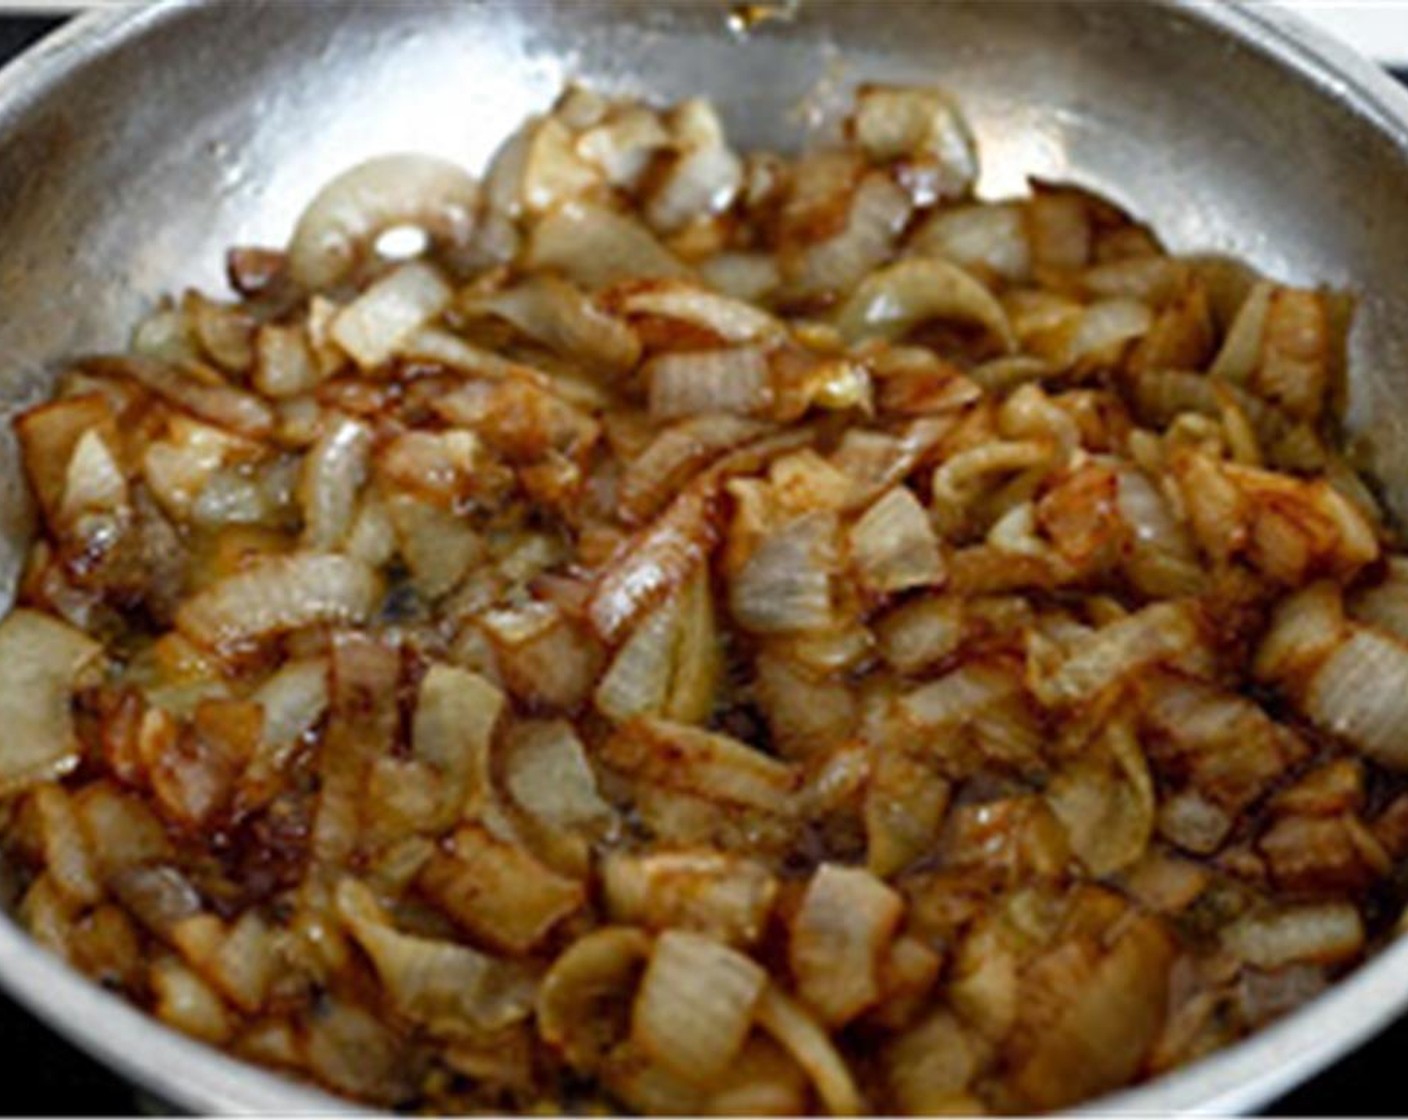 step 4 Gently stir the onions, they should be a nice brown color after about 20 minutes. At 30 minutes, add the Balsamic Vinegar (1 Tbsp) and Coconut Sugar (1 tsp) and stir until the sugar is dissolved. Remove from heat and set aside.